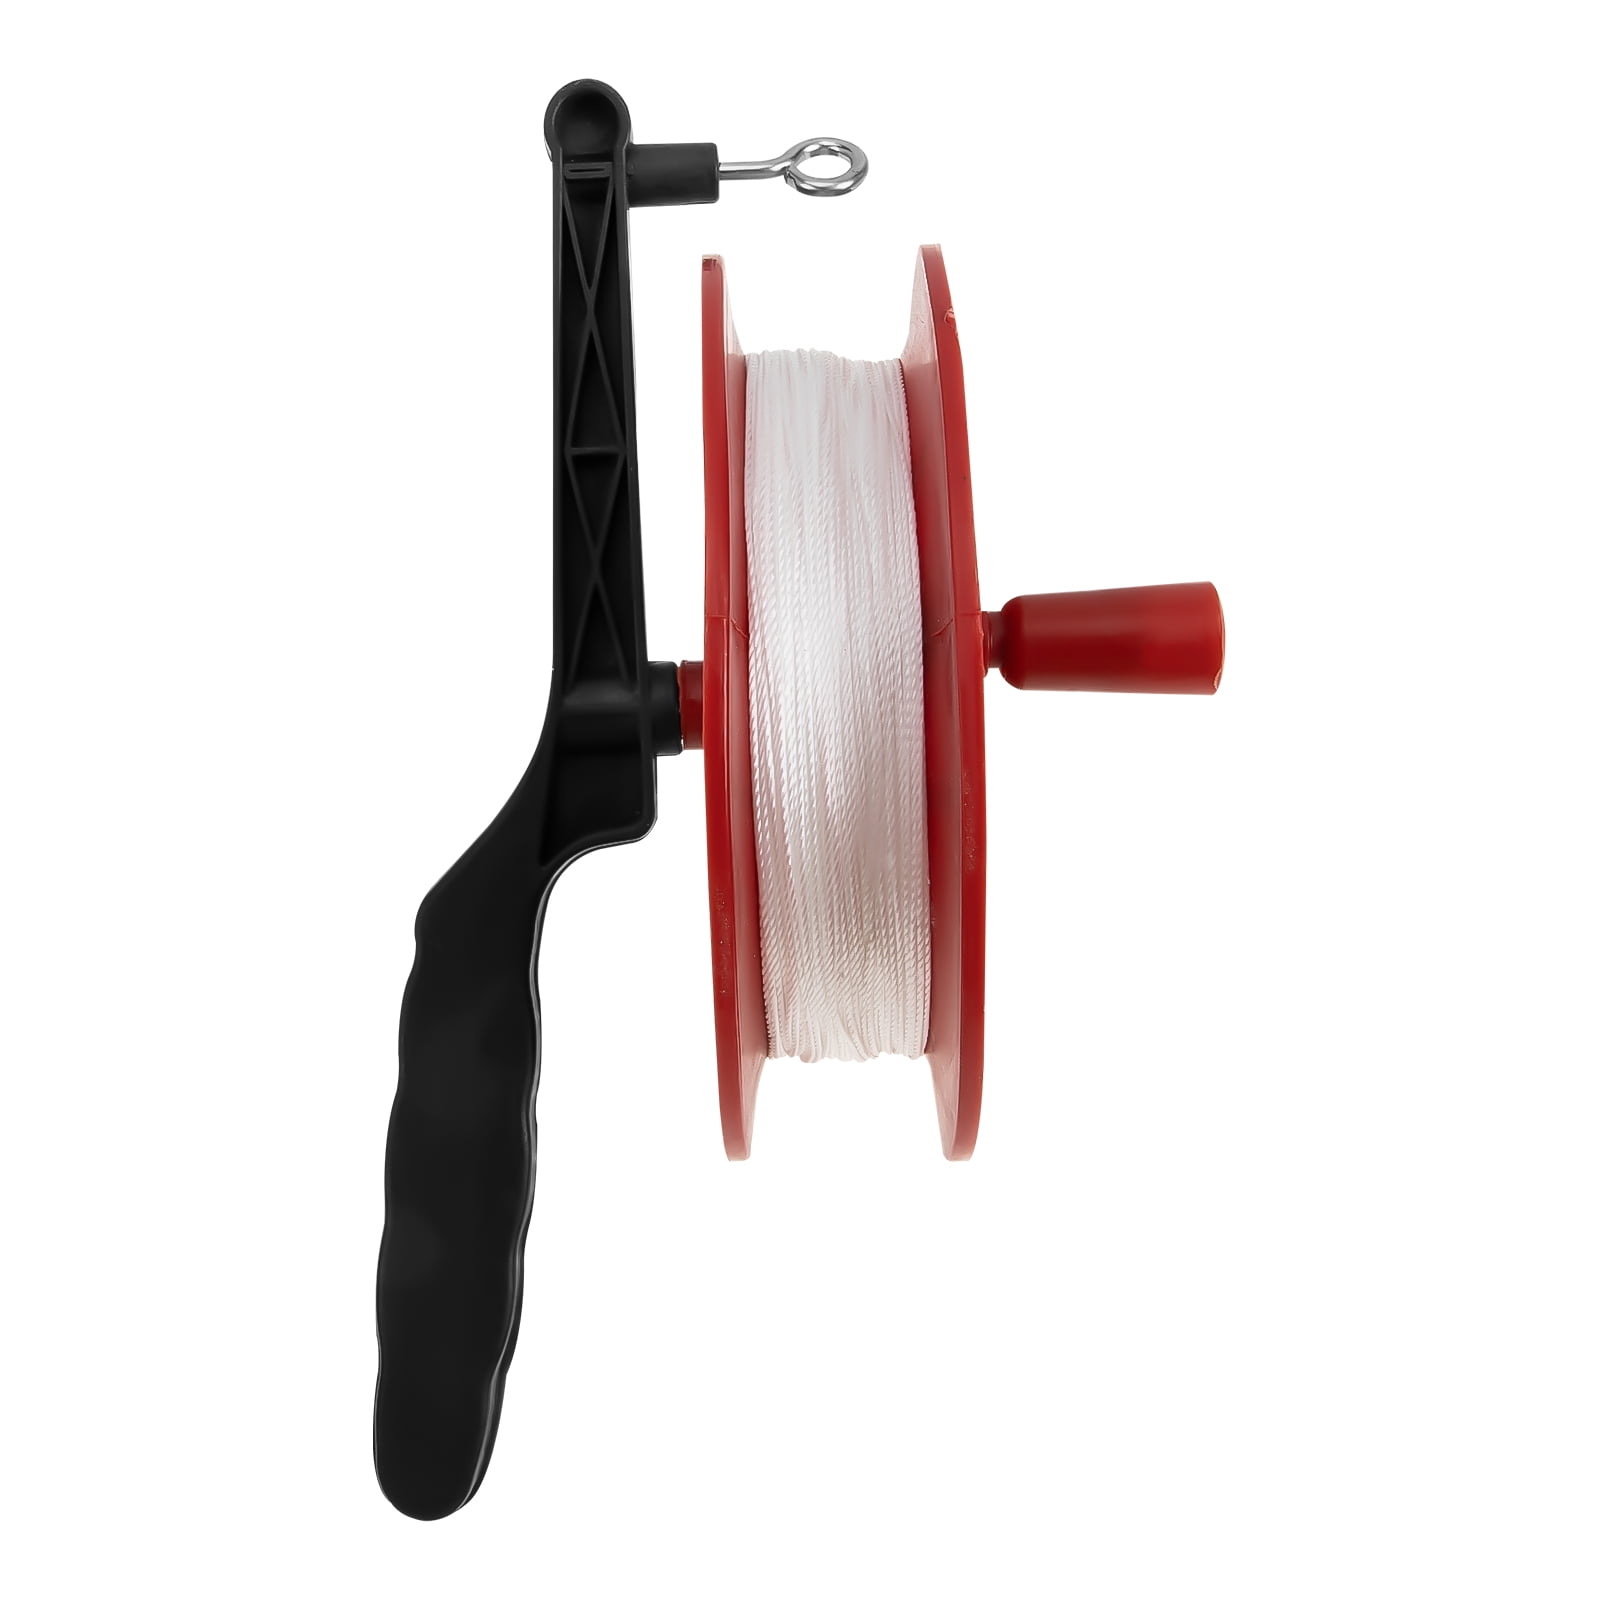 100M Kite Winder Kite Spool Kite Twisted String Wheel Kite Line Winding Reel with Durable Anti-Slip Handle for Kids Adults and Outdoor Sport Kite Flying Tool Accessories 